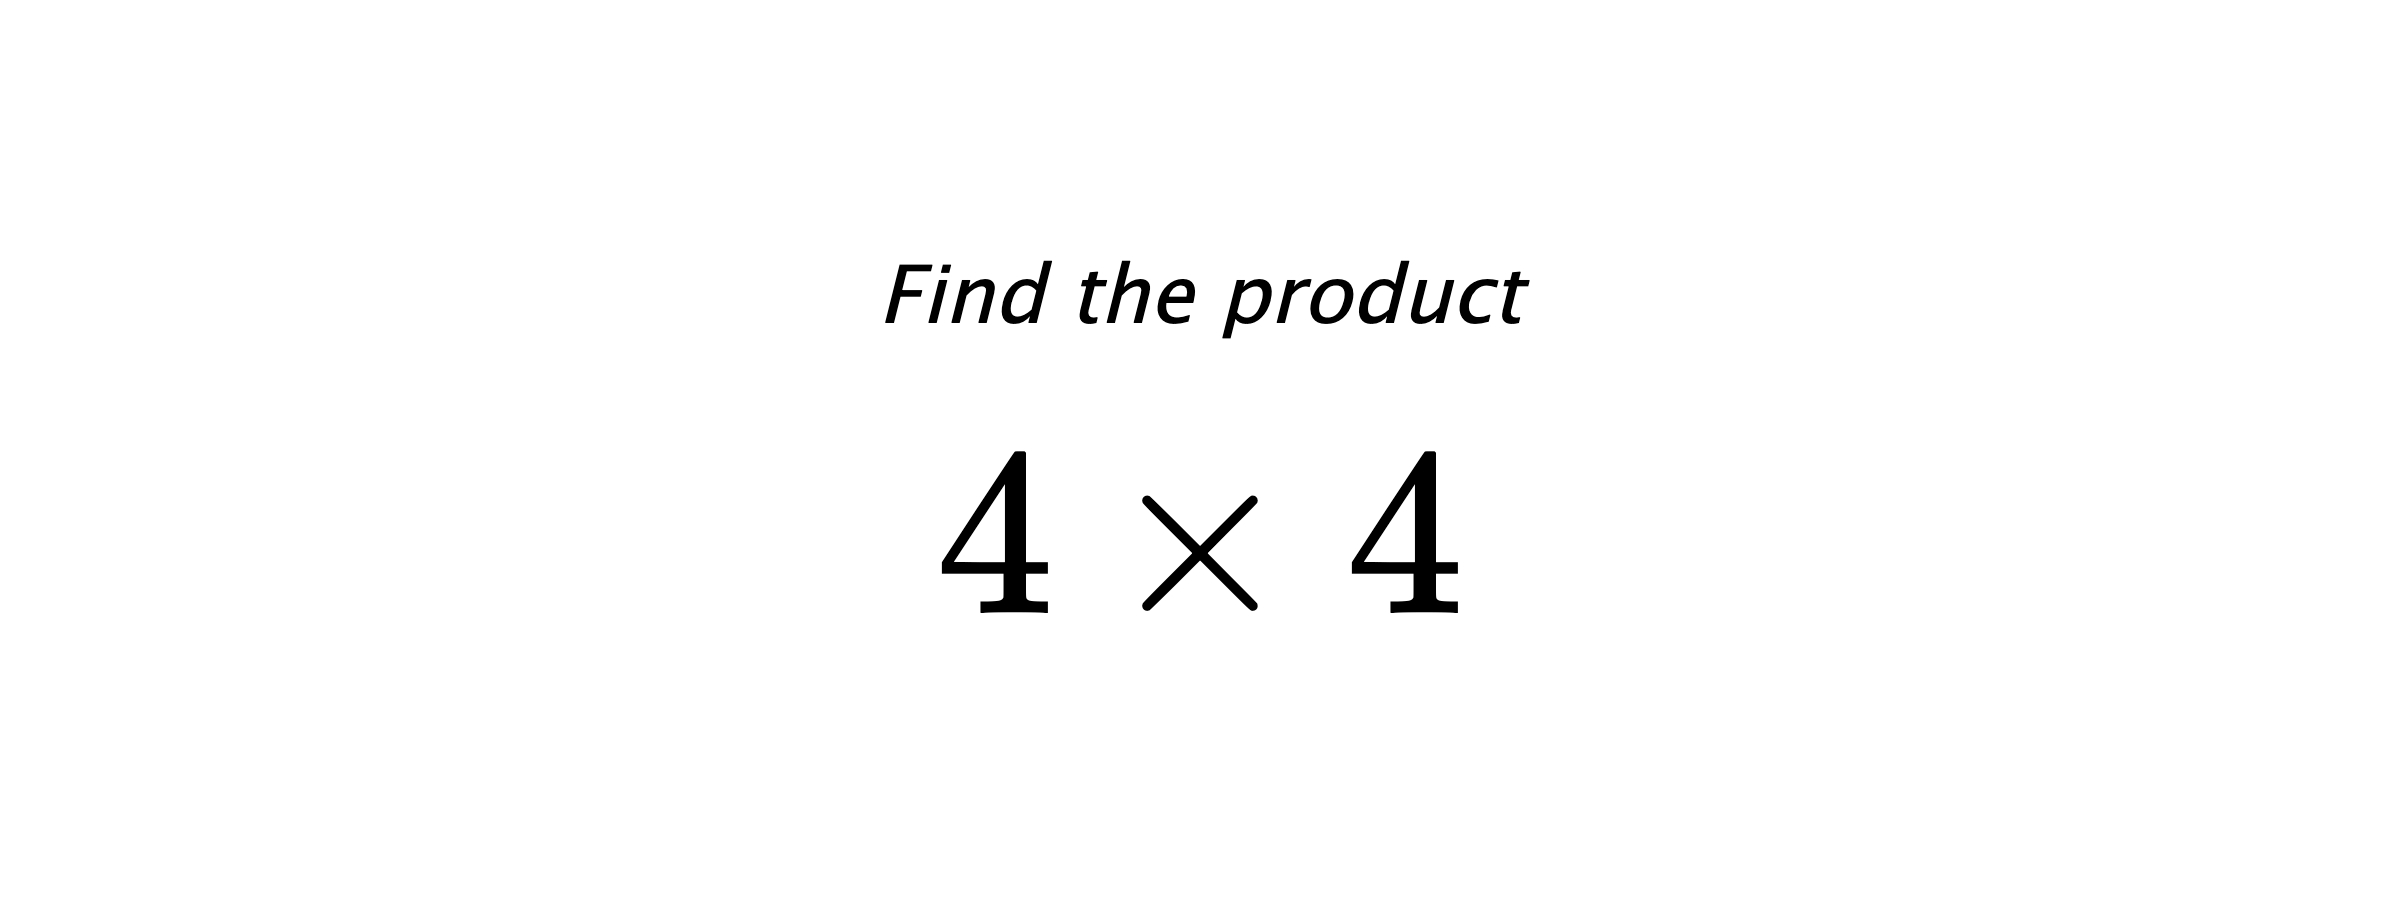 Find the product $ 4 \times 4 $